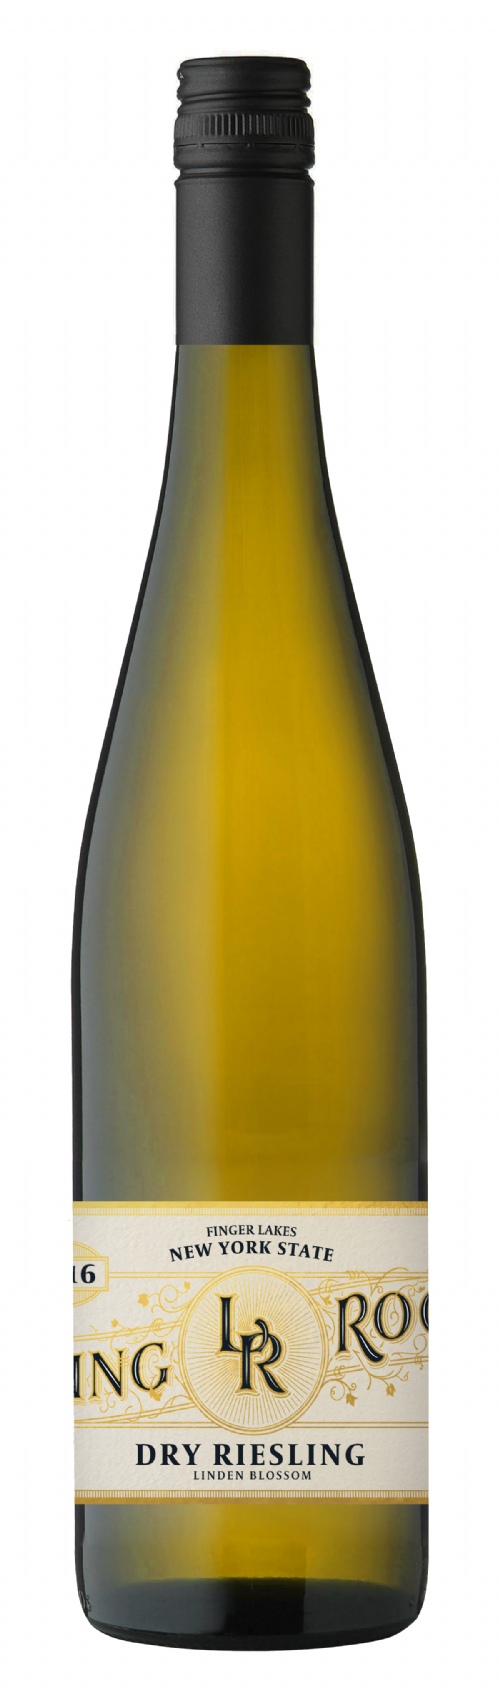 2019 FINGER LAKES DRY RIESLING